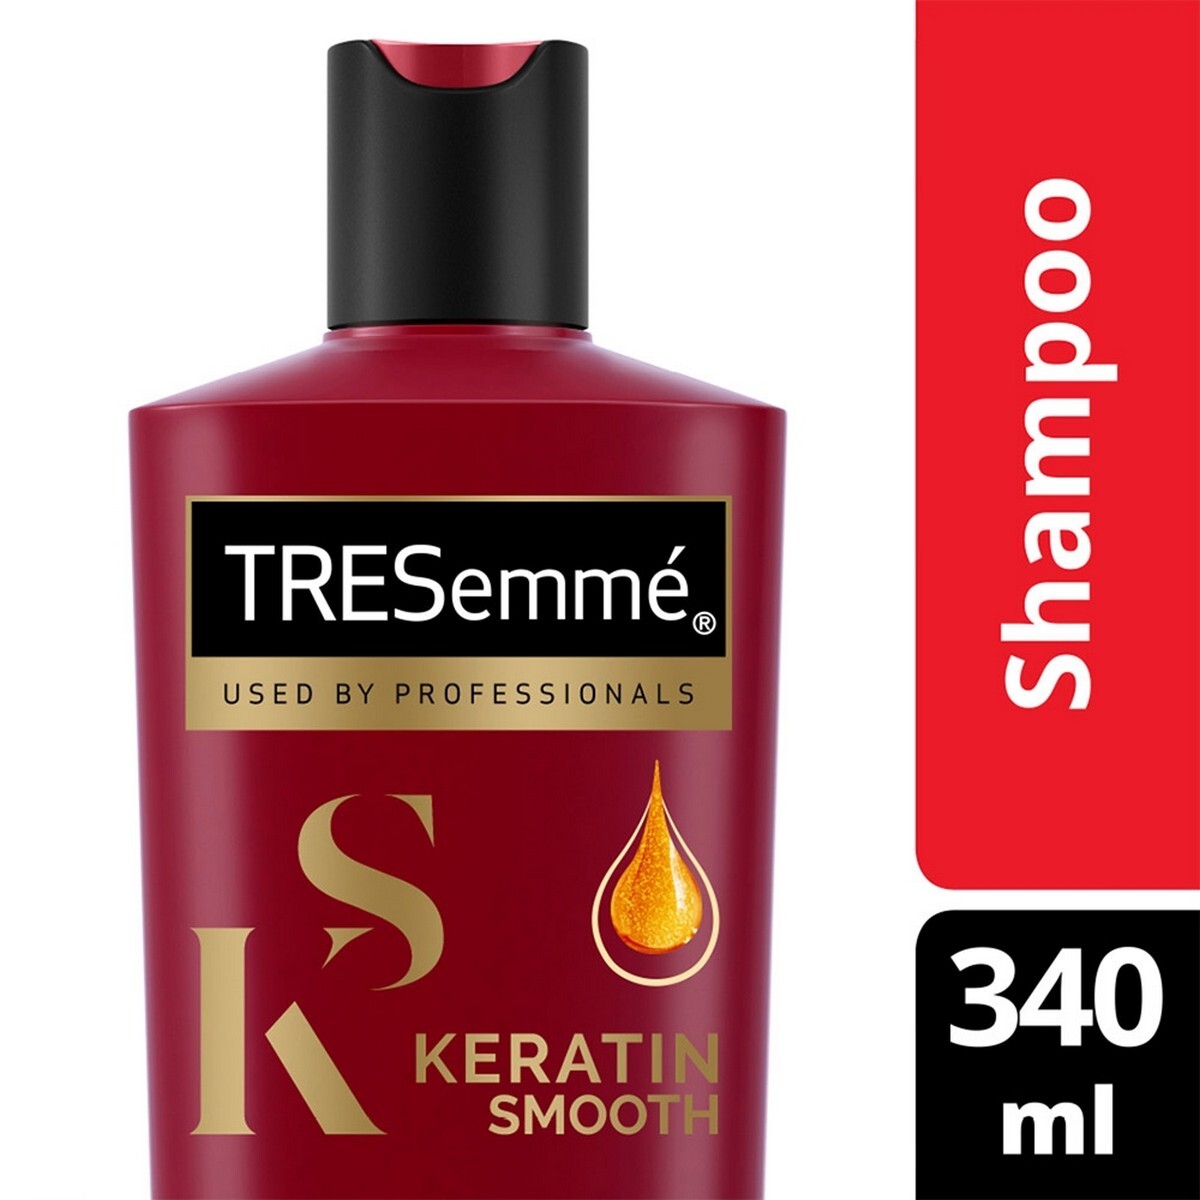 Tresemme Keratin Smooth Pro Collection Shampoo - With Argan Oil, 340 Ml